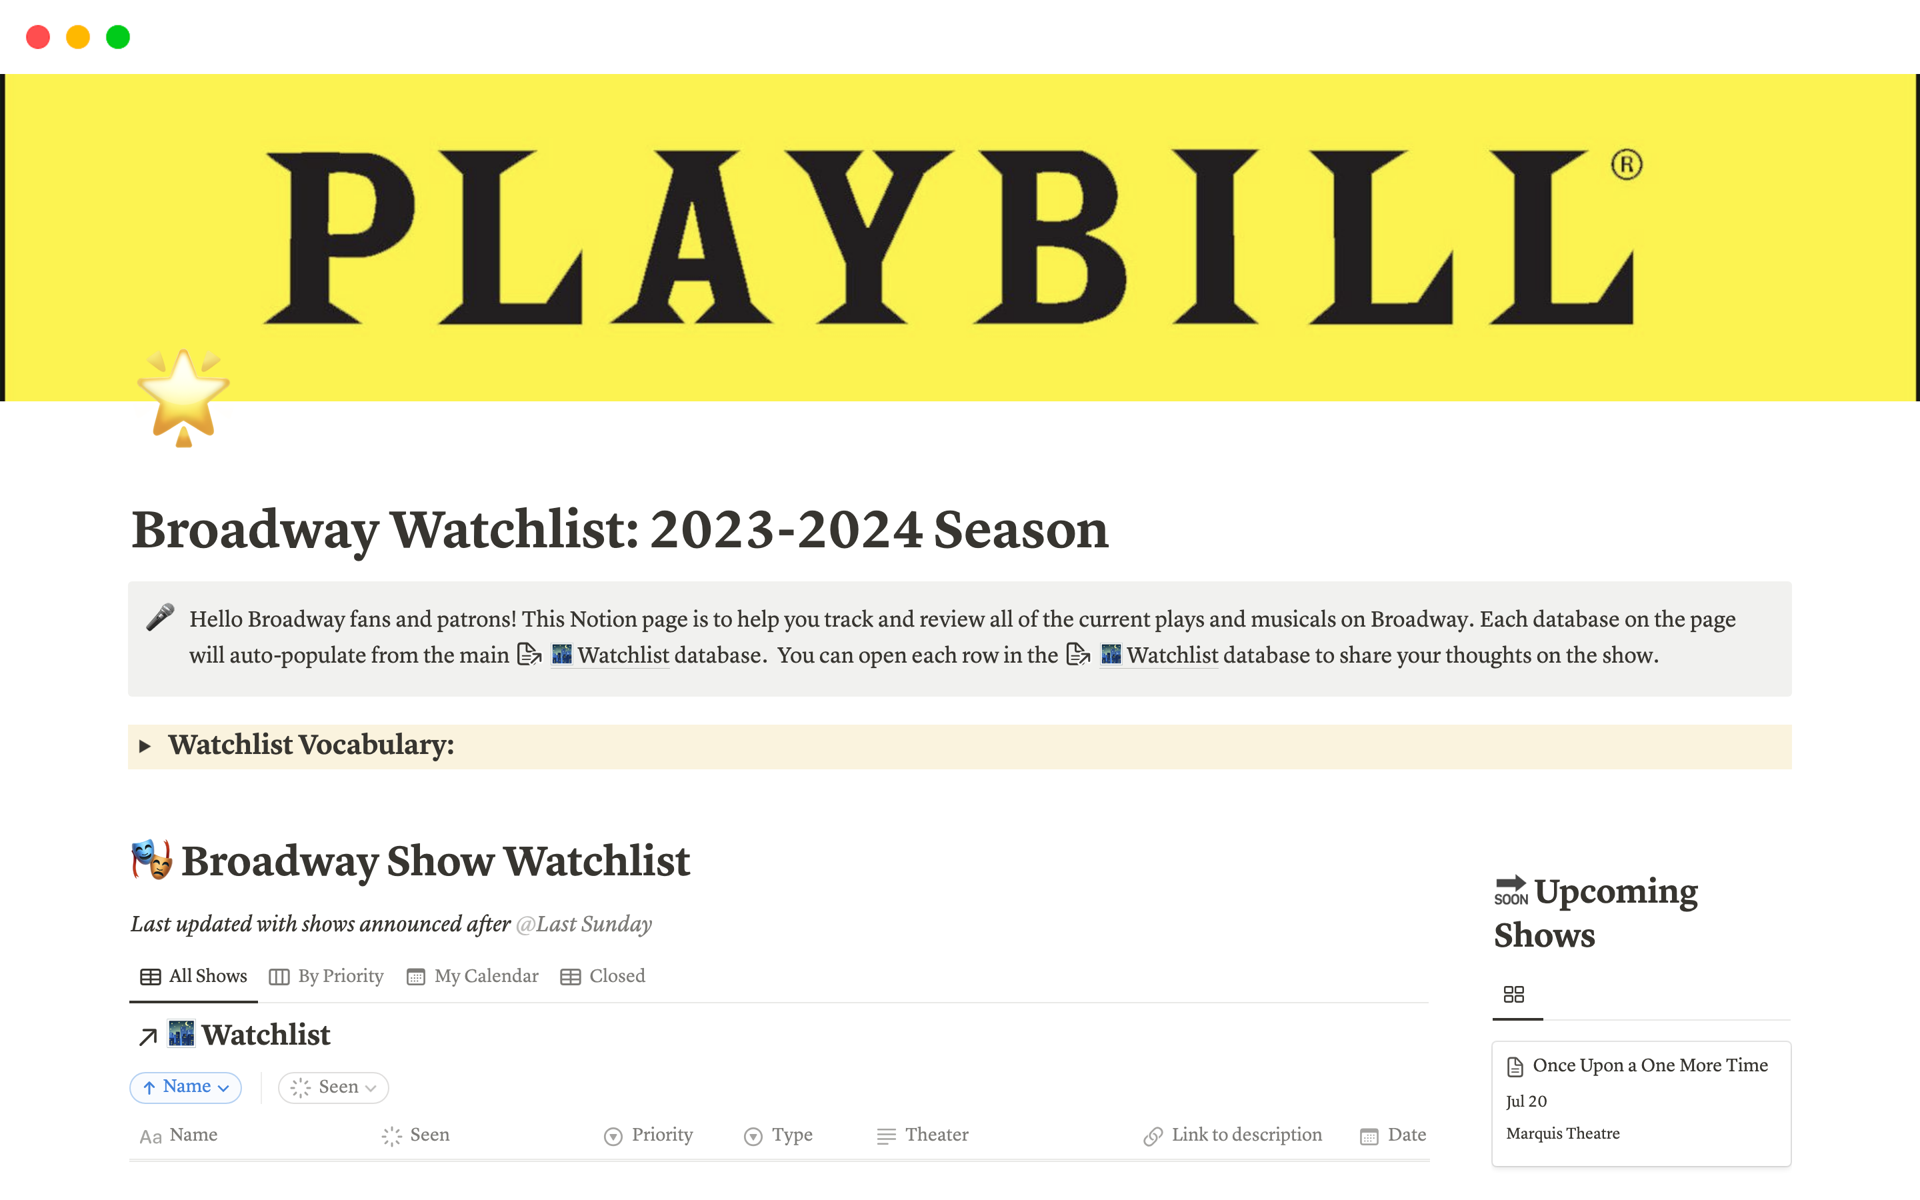 Use this template to help track and review all of the current plays and musicals on Broadway. 